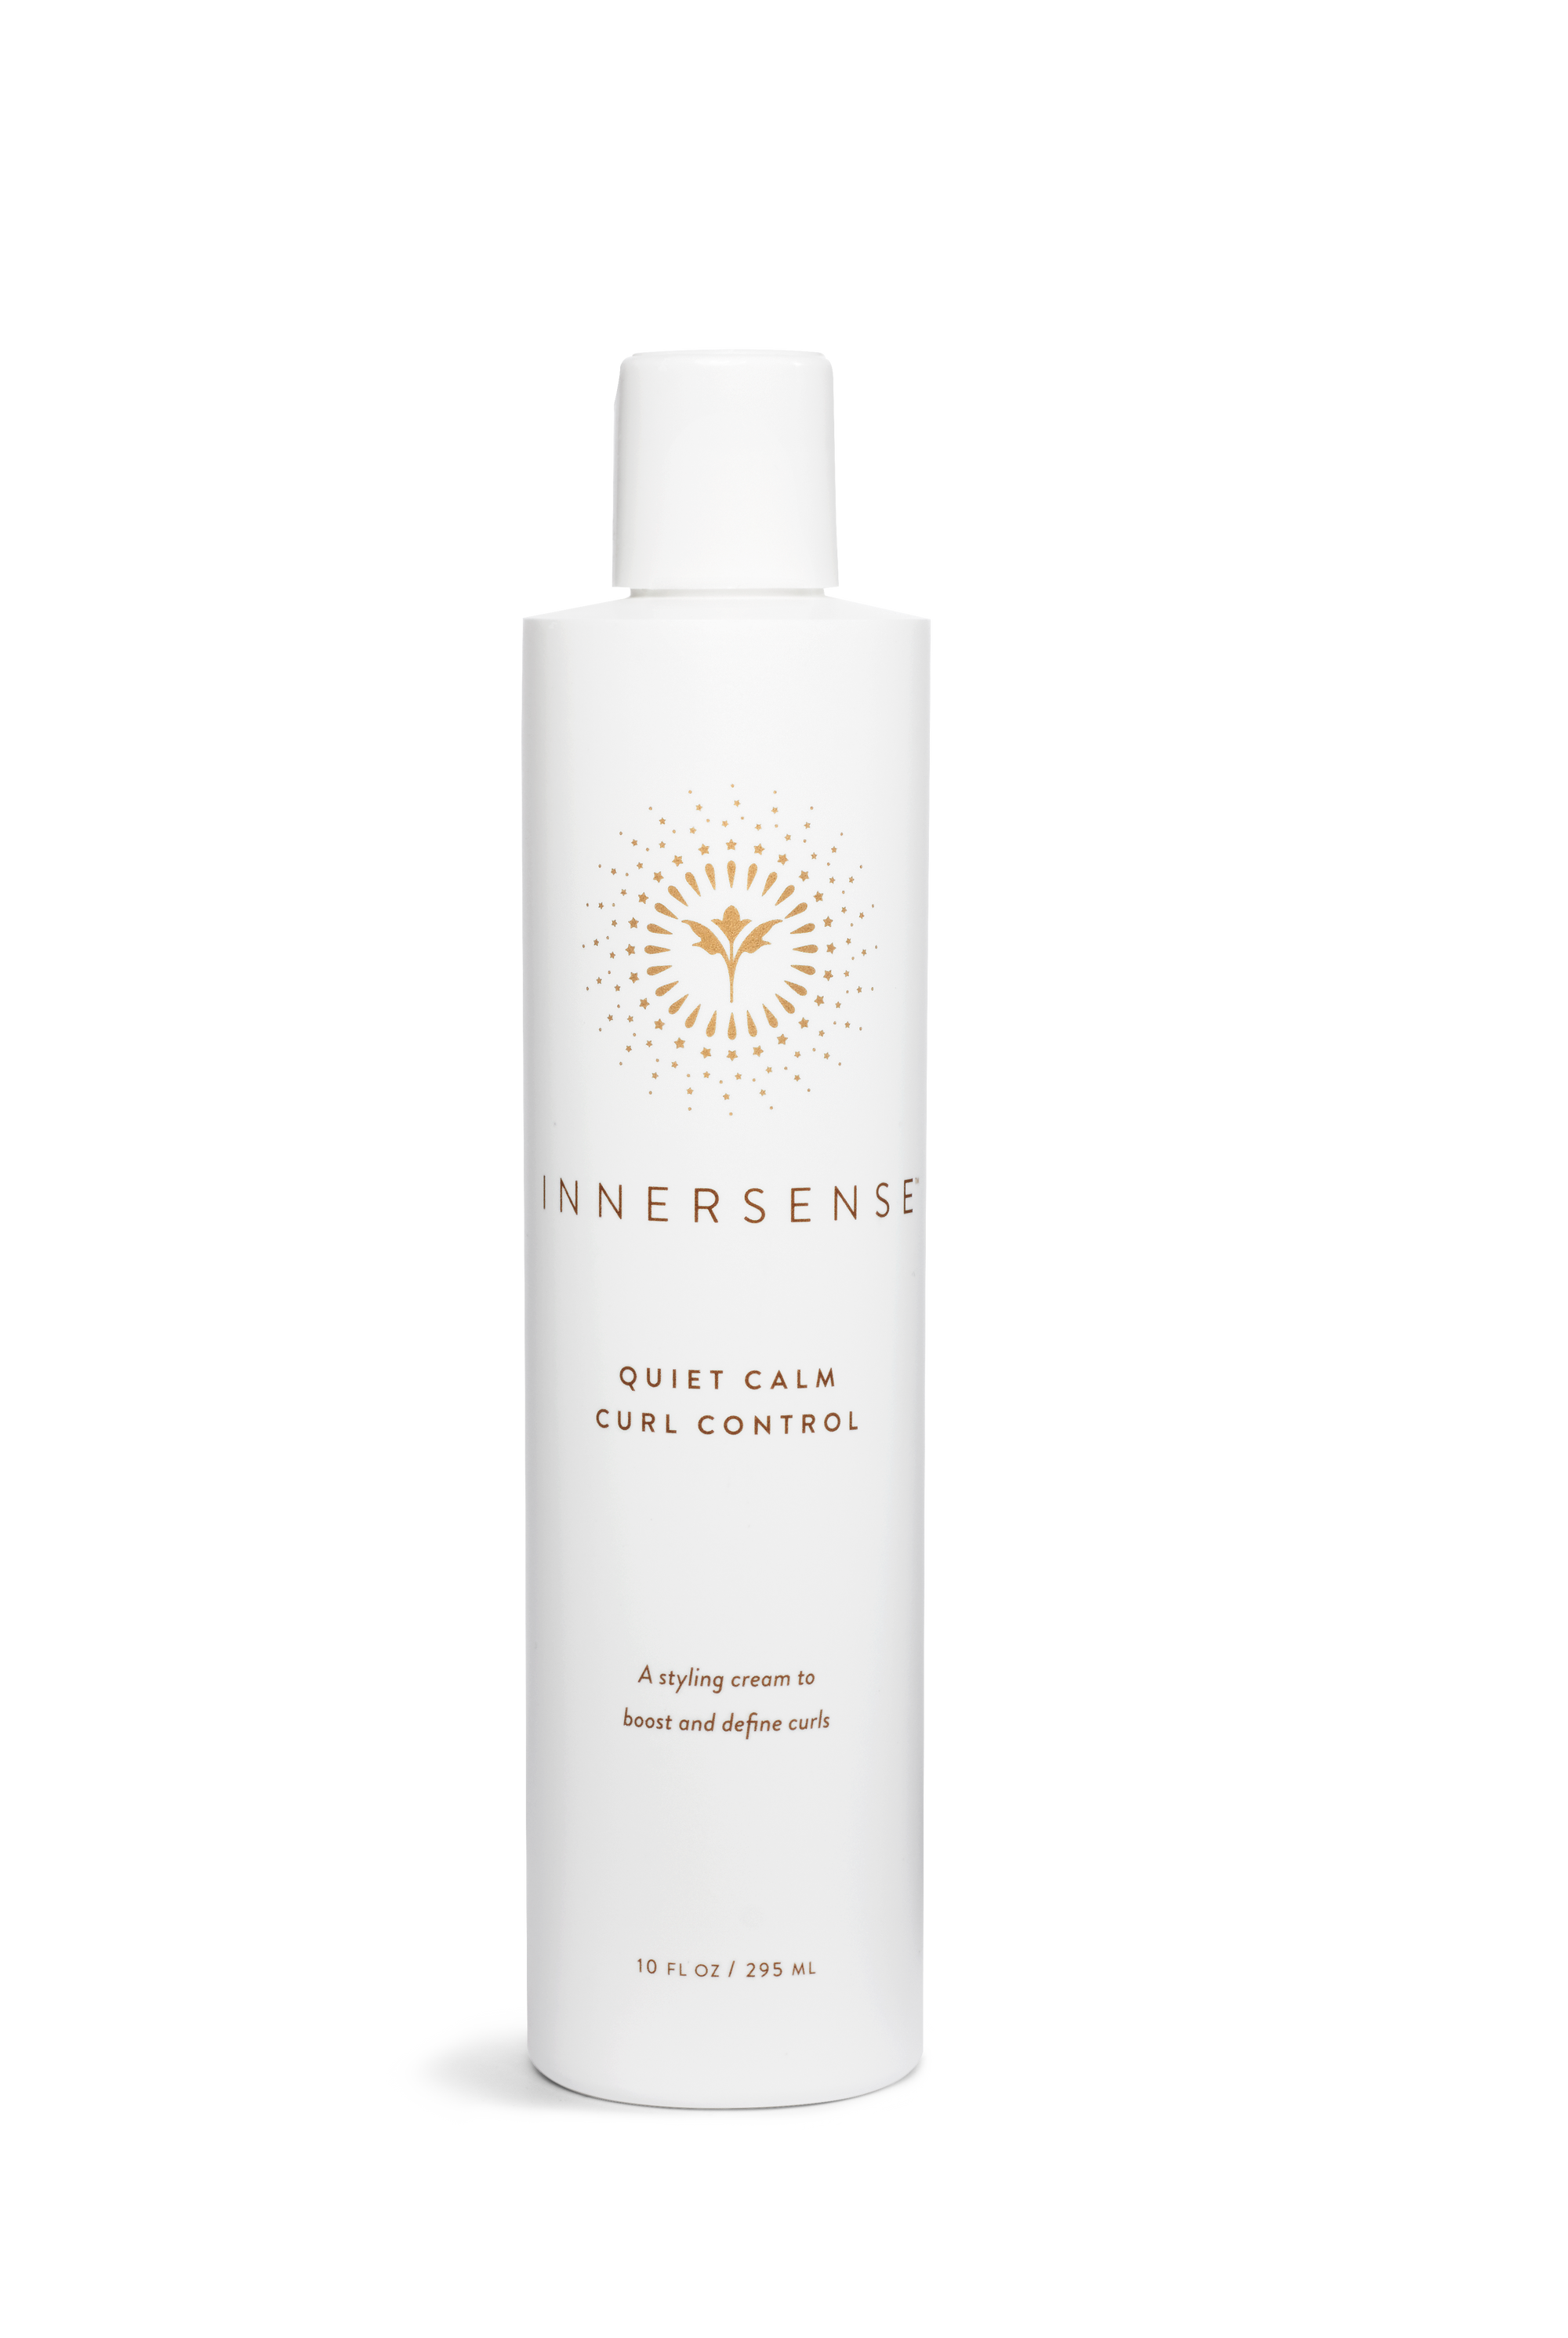 Innersense Quiet Calm Curl Control - Shop Now at Curl Warehouse